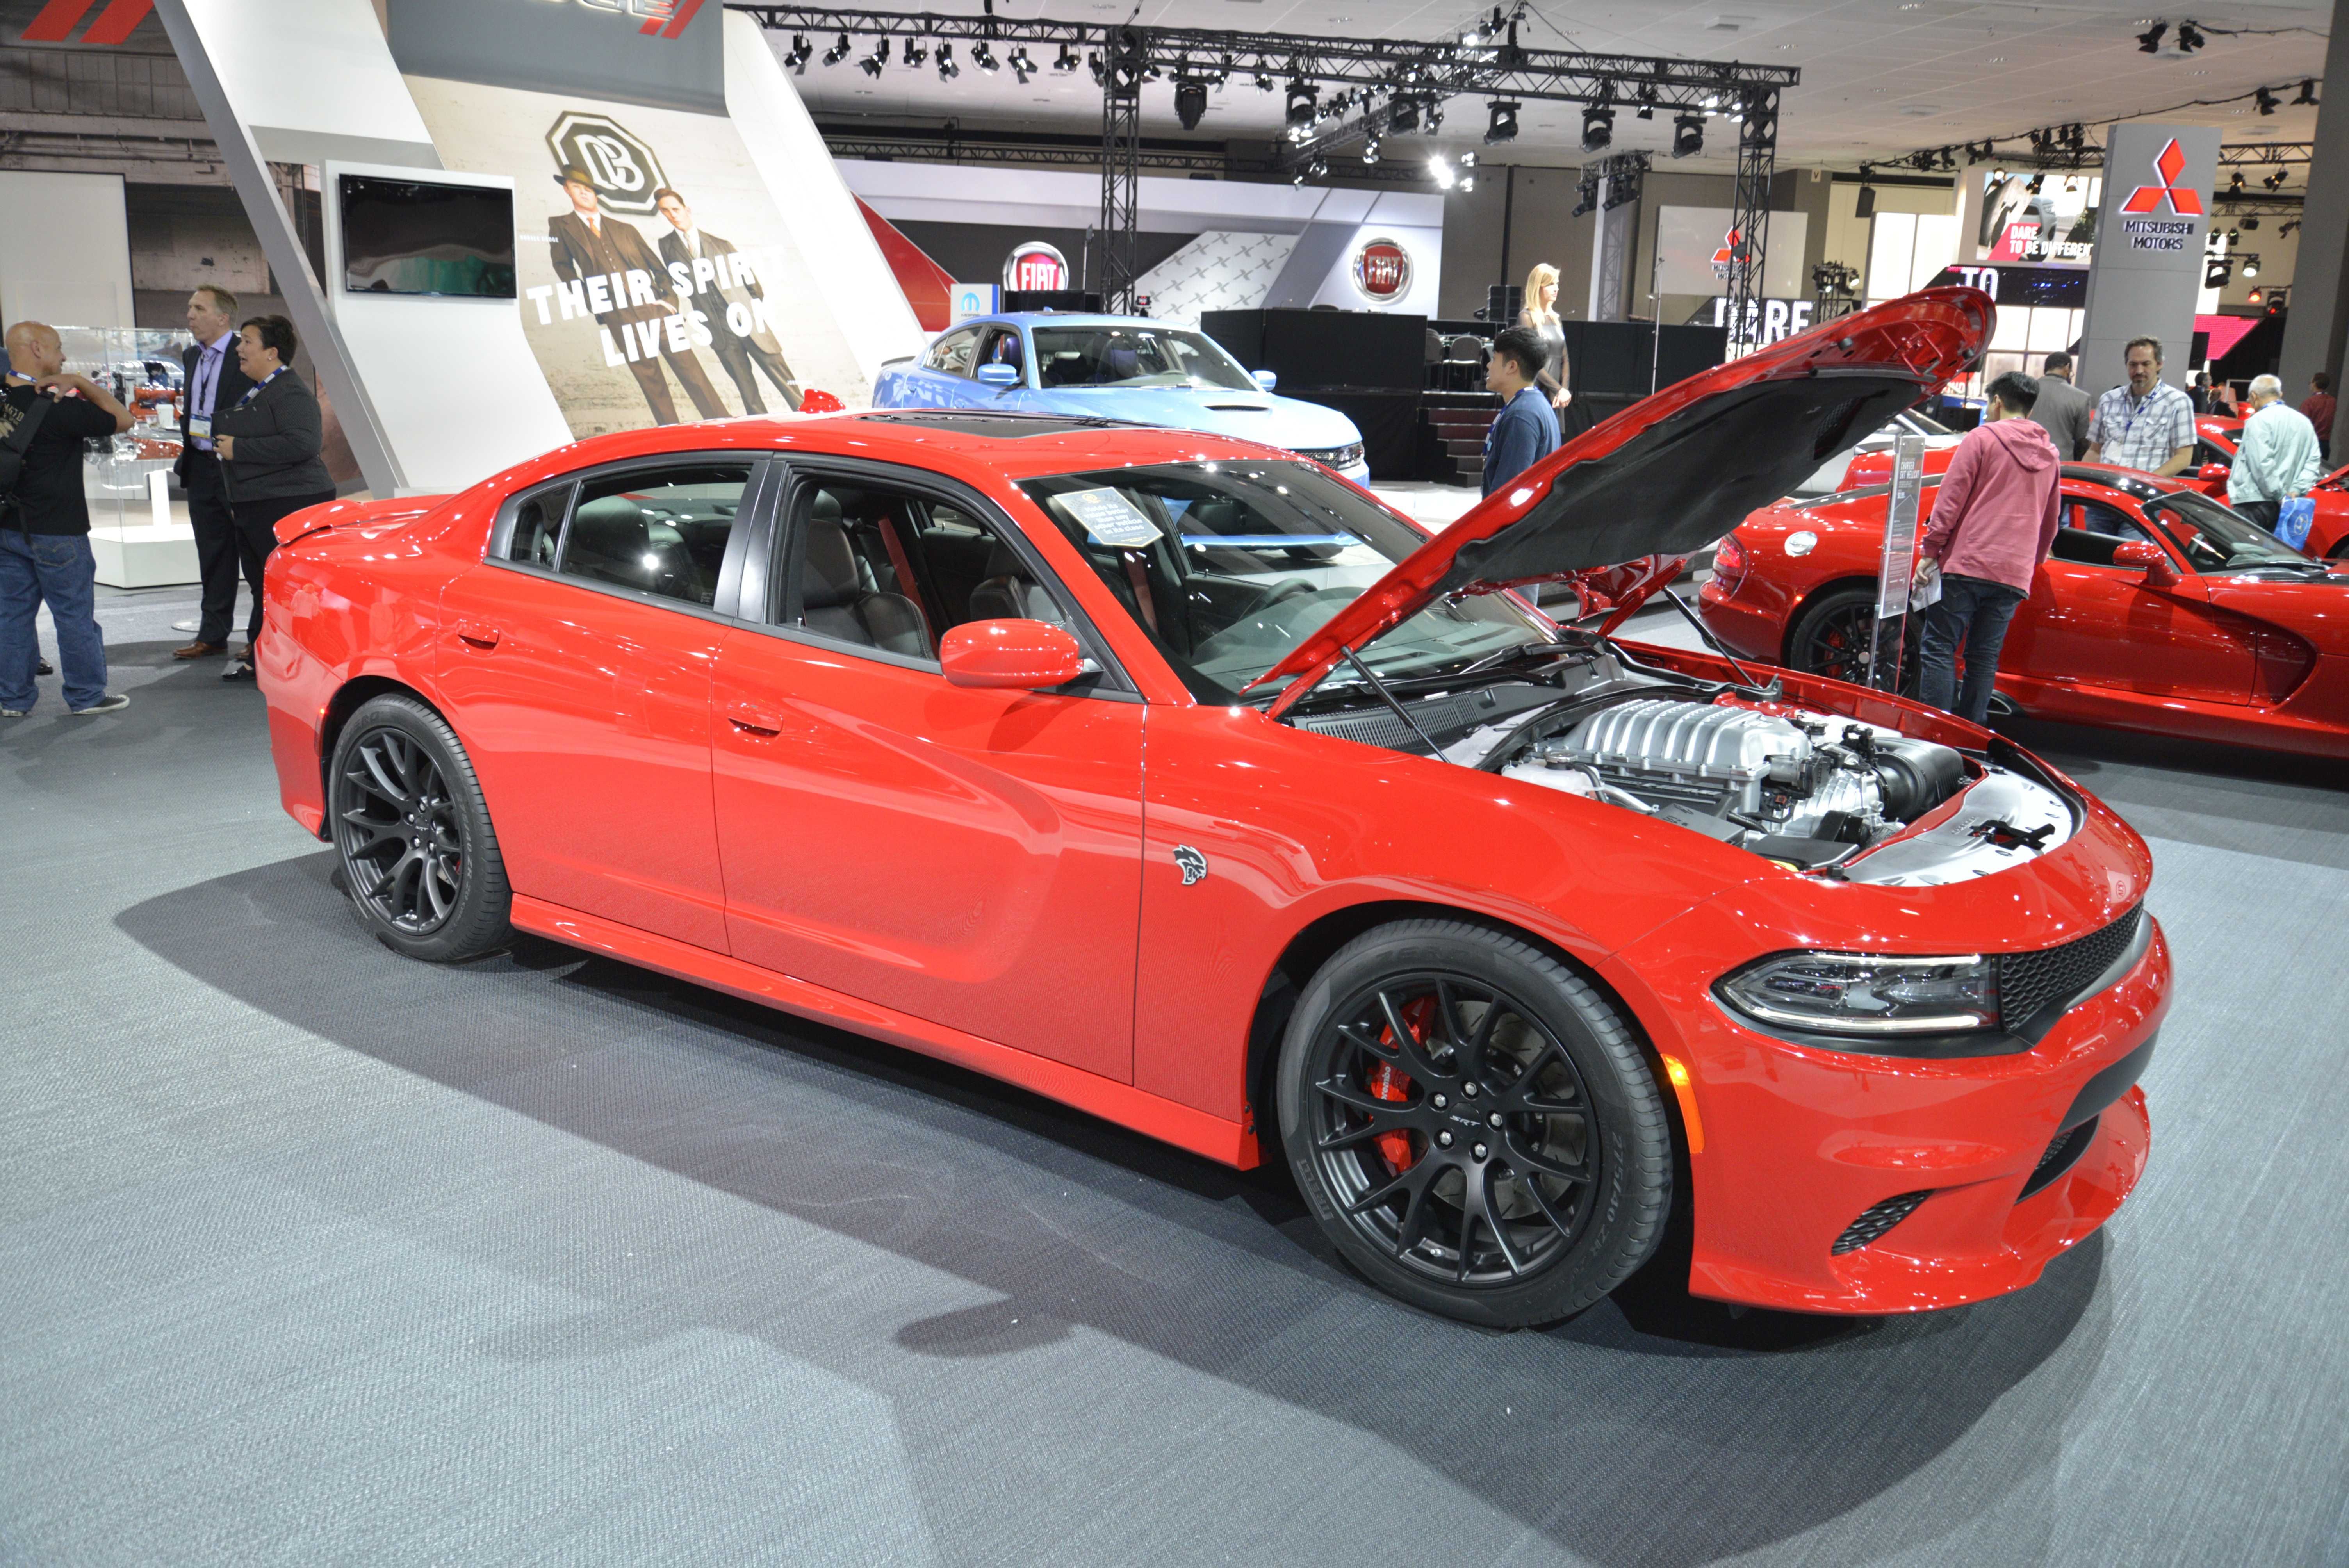 Dodge Charger Hellcat on show.